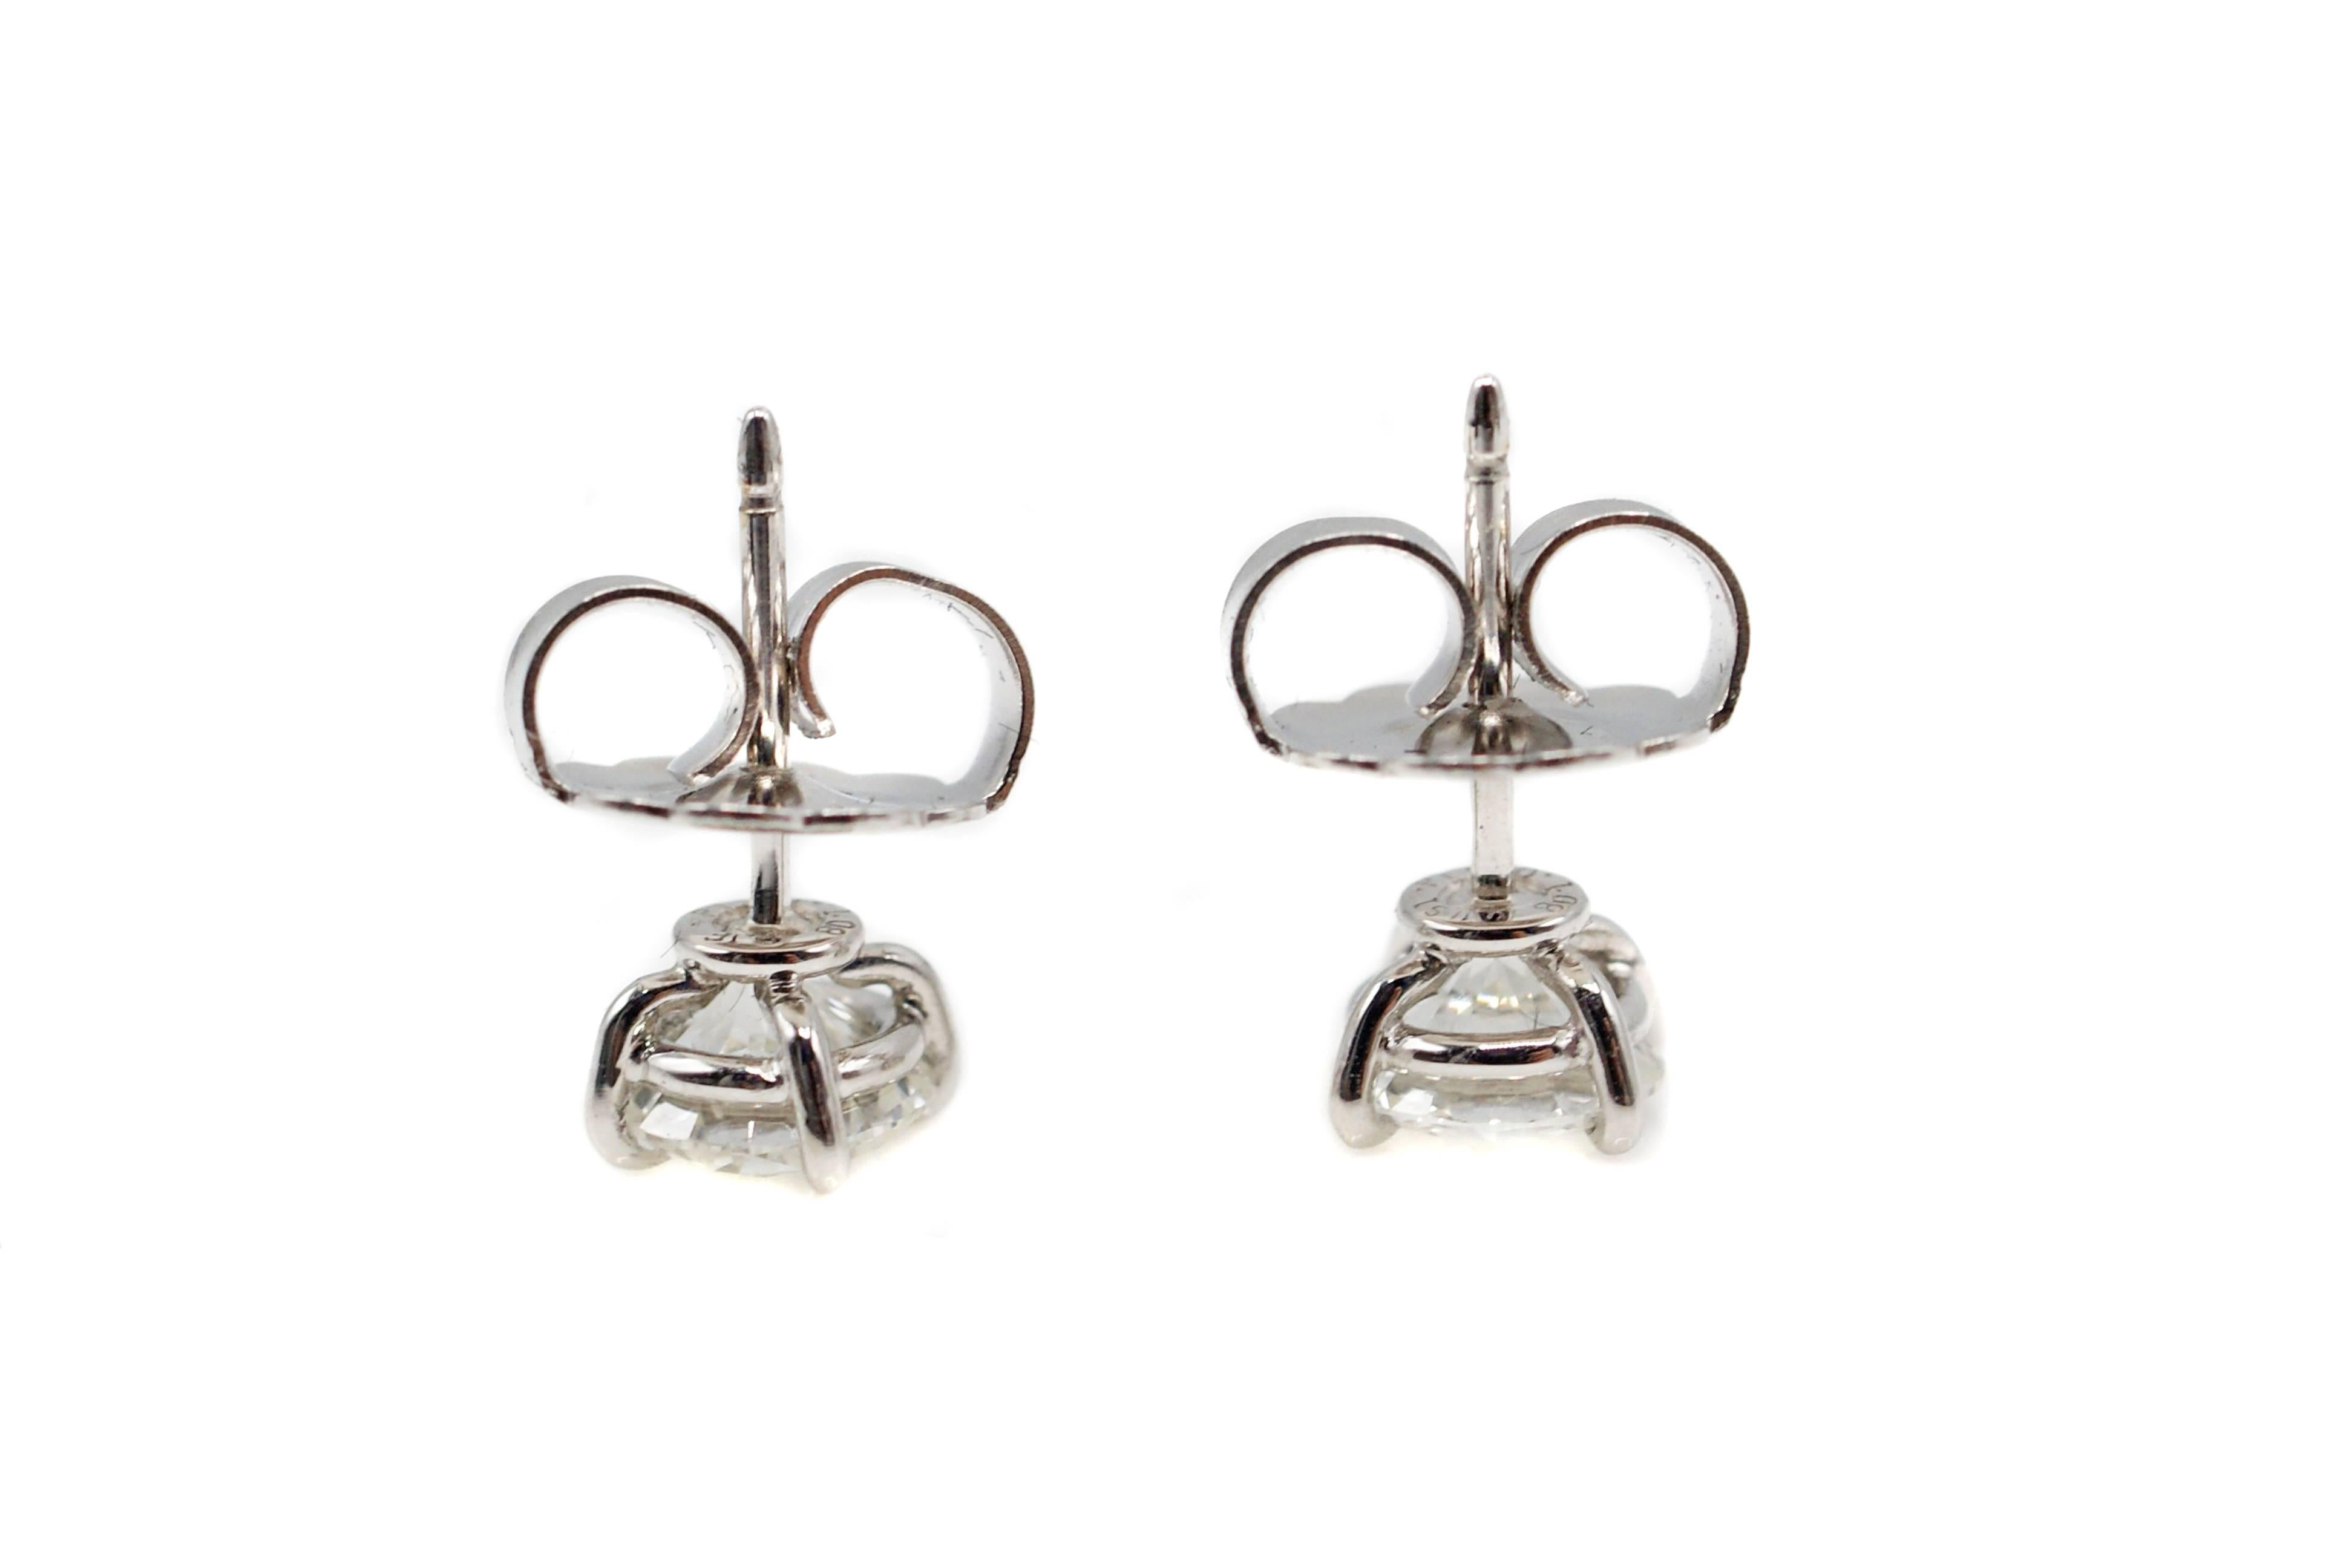 The perfect size and quality of diamond stud earrings is presented in these luxurious perfectly matched pair, set in 4 eagle-claw platinum prongs. The prongs are shaped to securely hold these valuable bright white and sparkly round brilliant cut